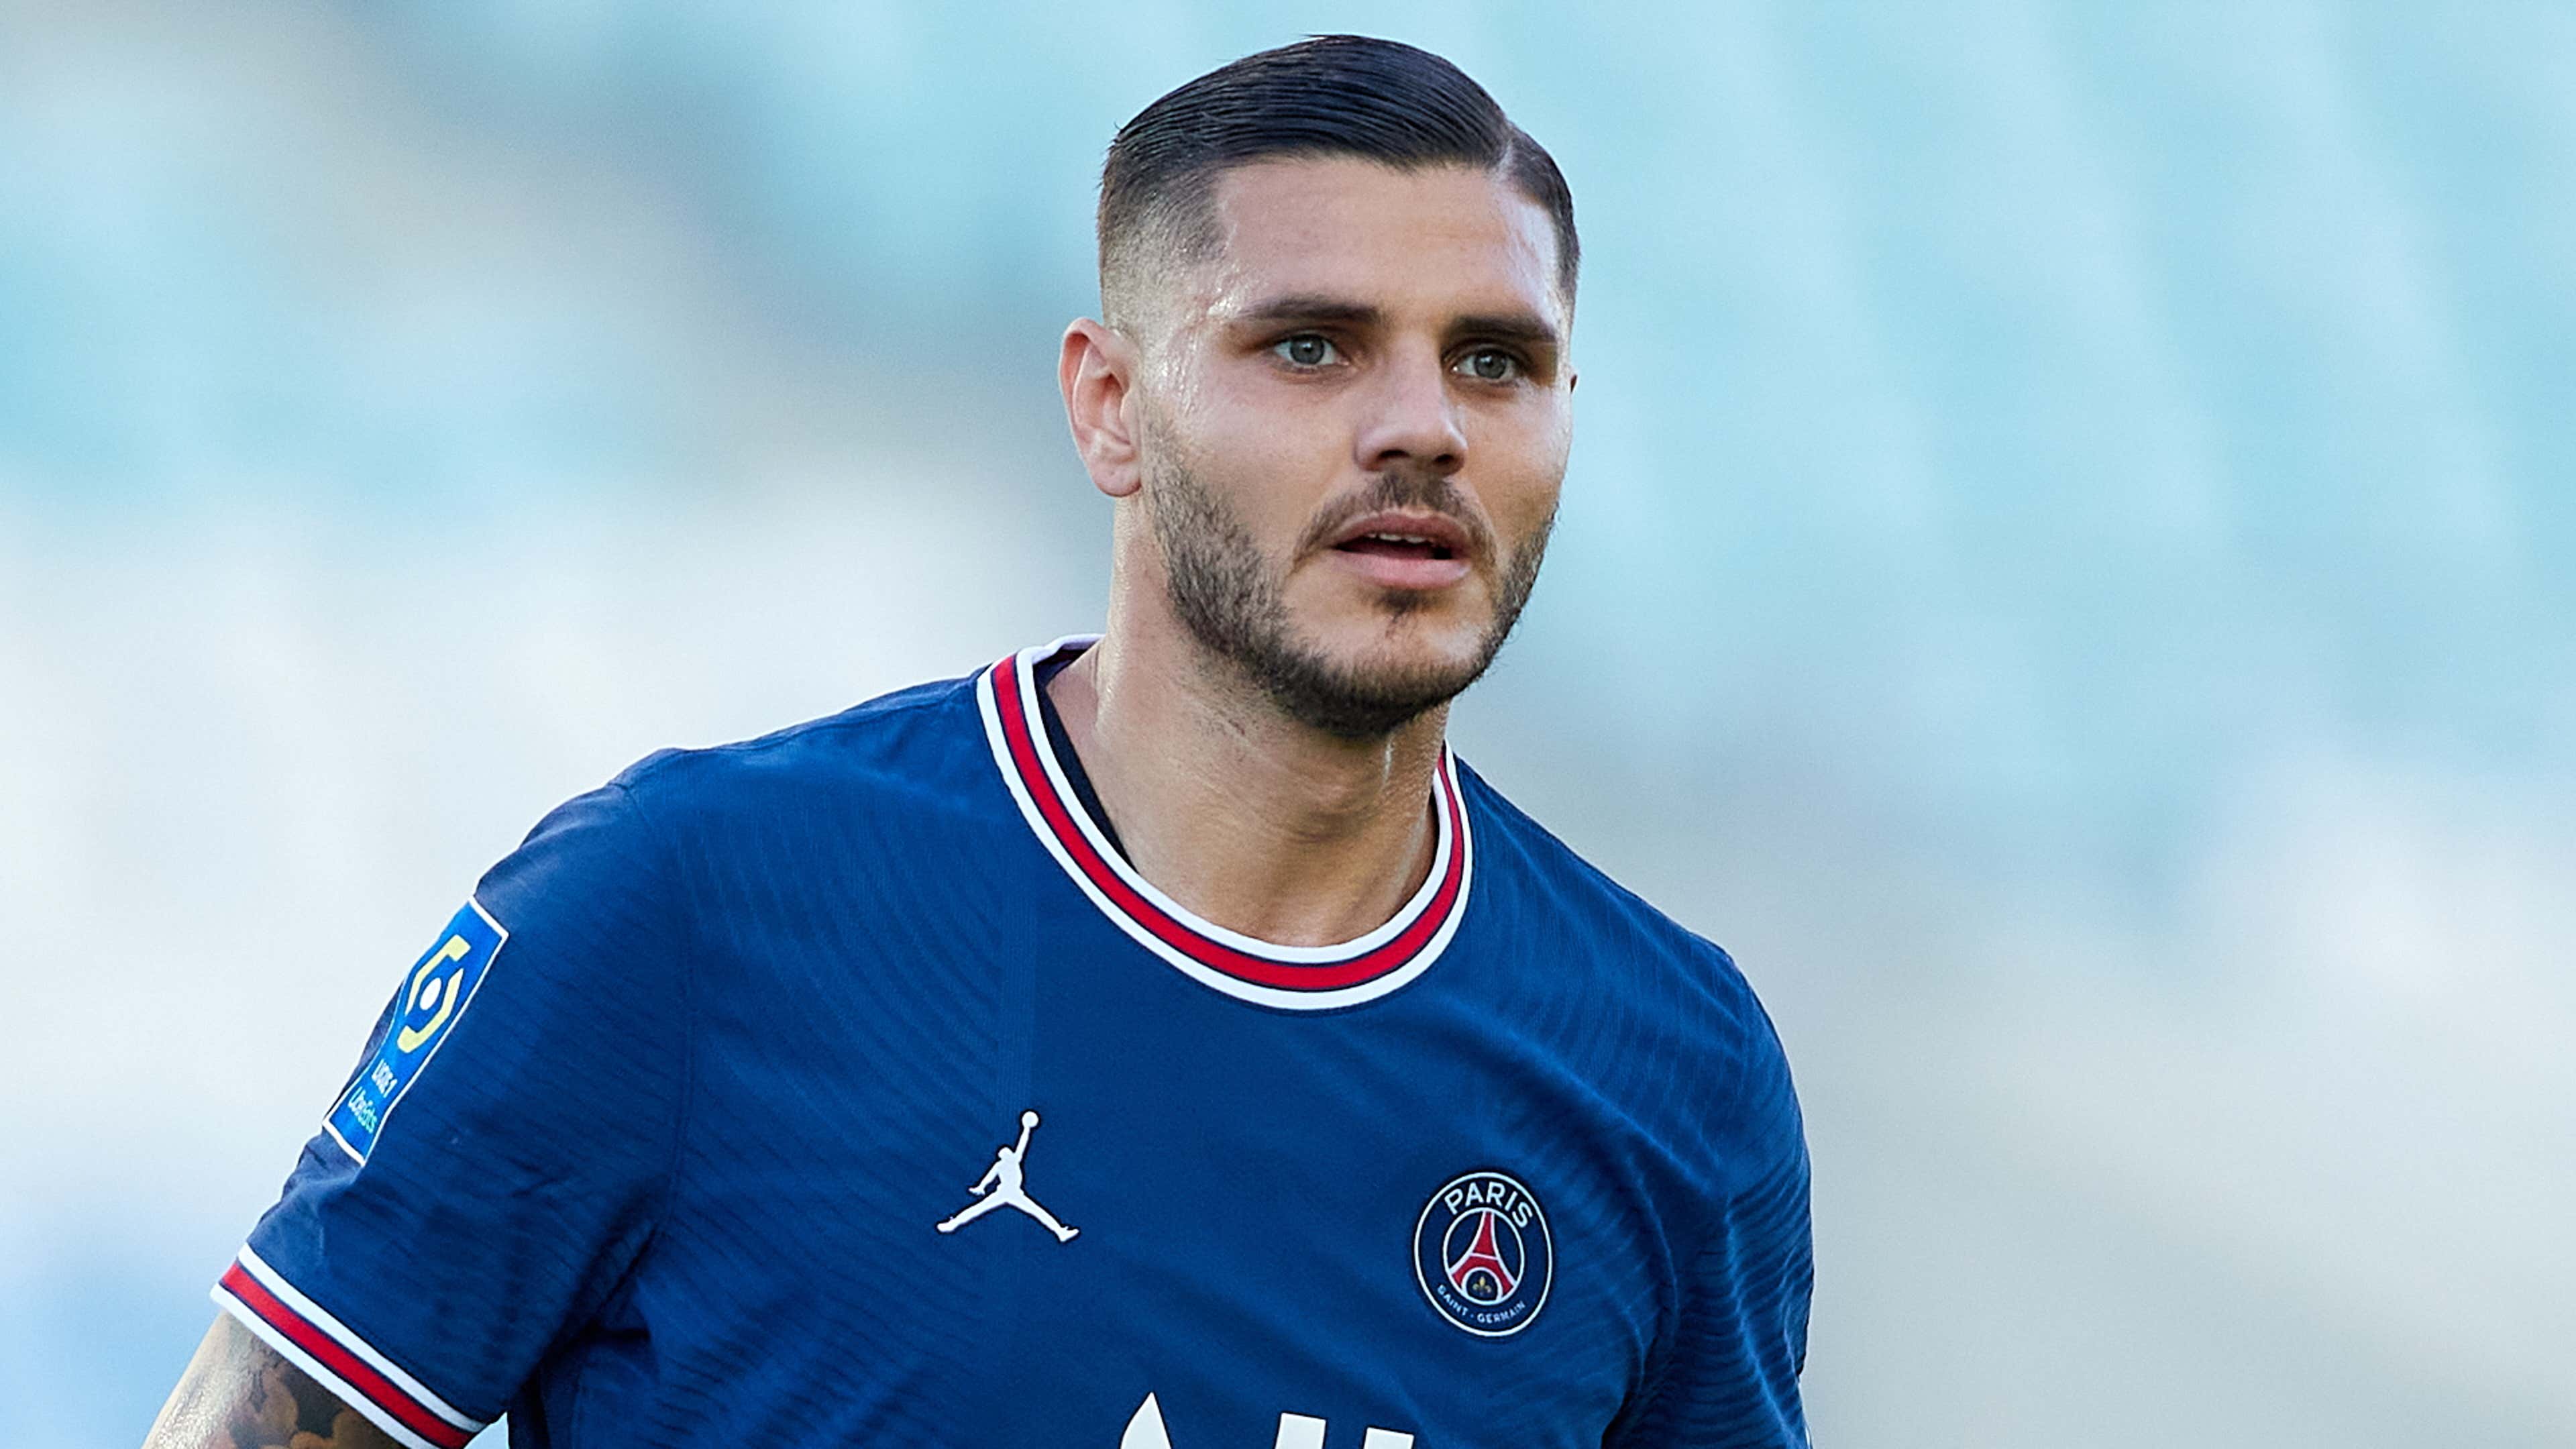 Transfer news and rumours LIVE: Chelsea open to signing Icardi